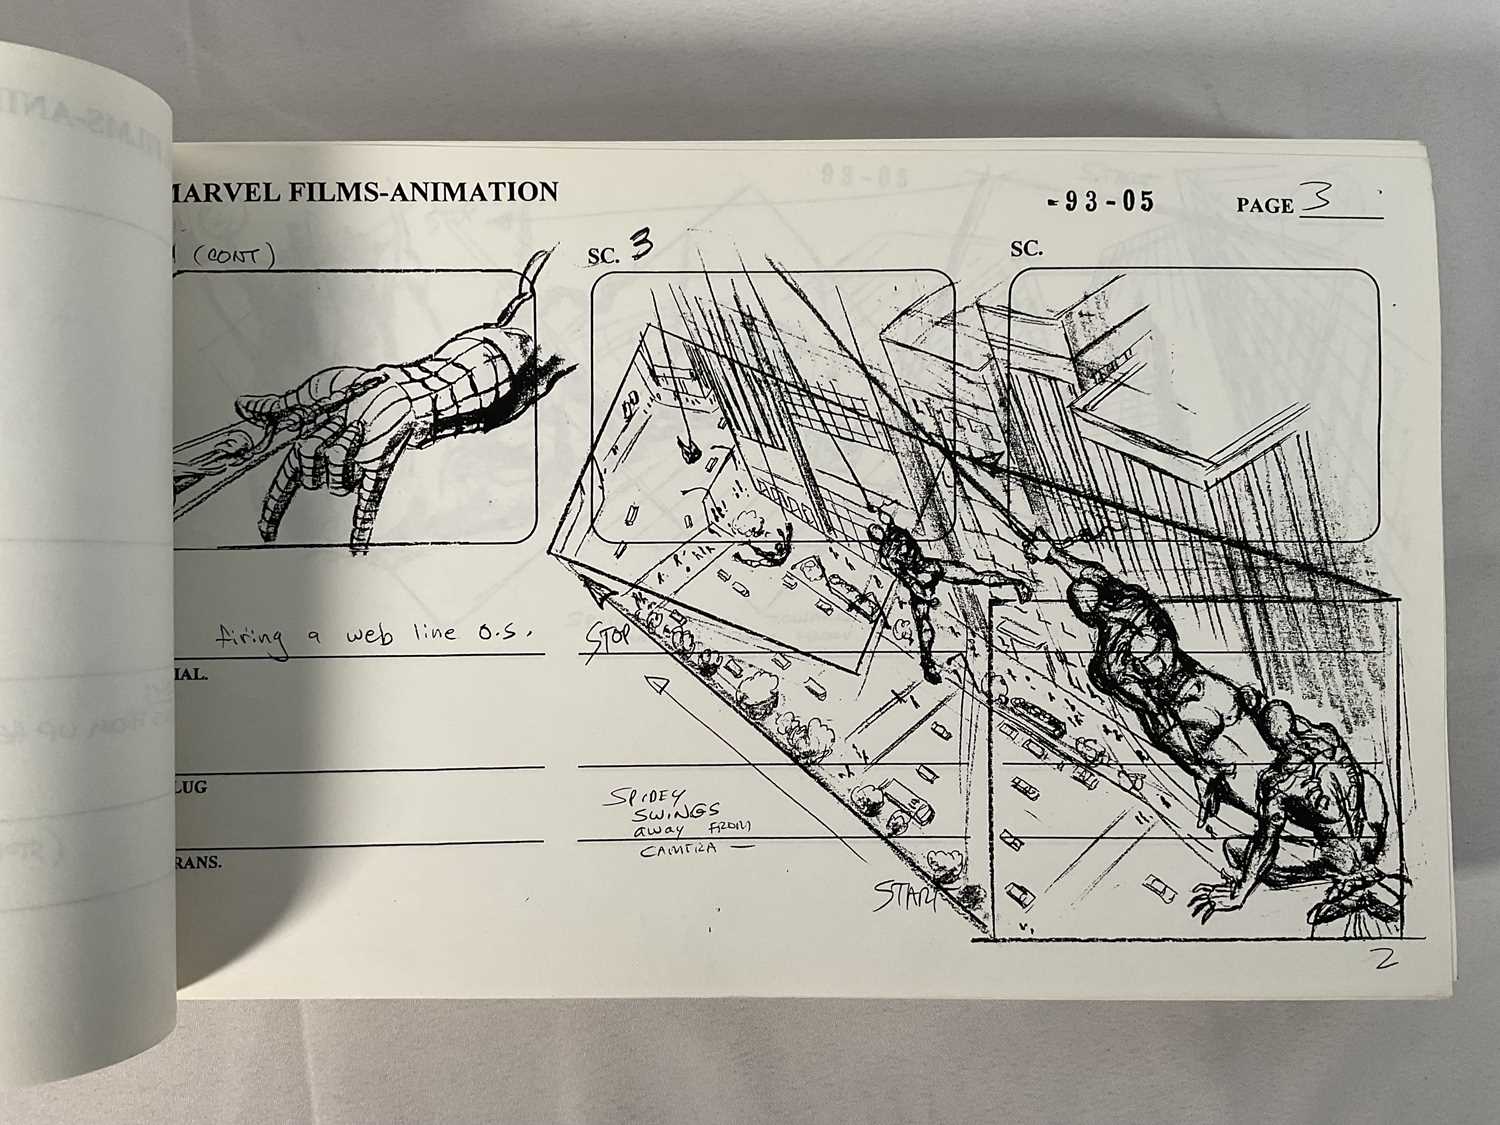 A folio of storyboards from the production of SPIDER-MAN the animated series, signed and stamped - Image 3 of 9